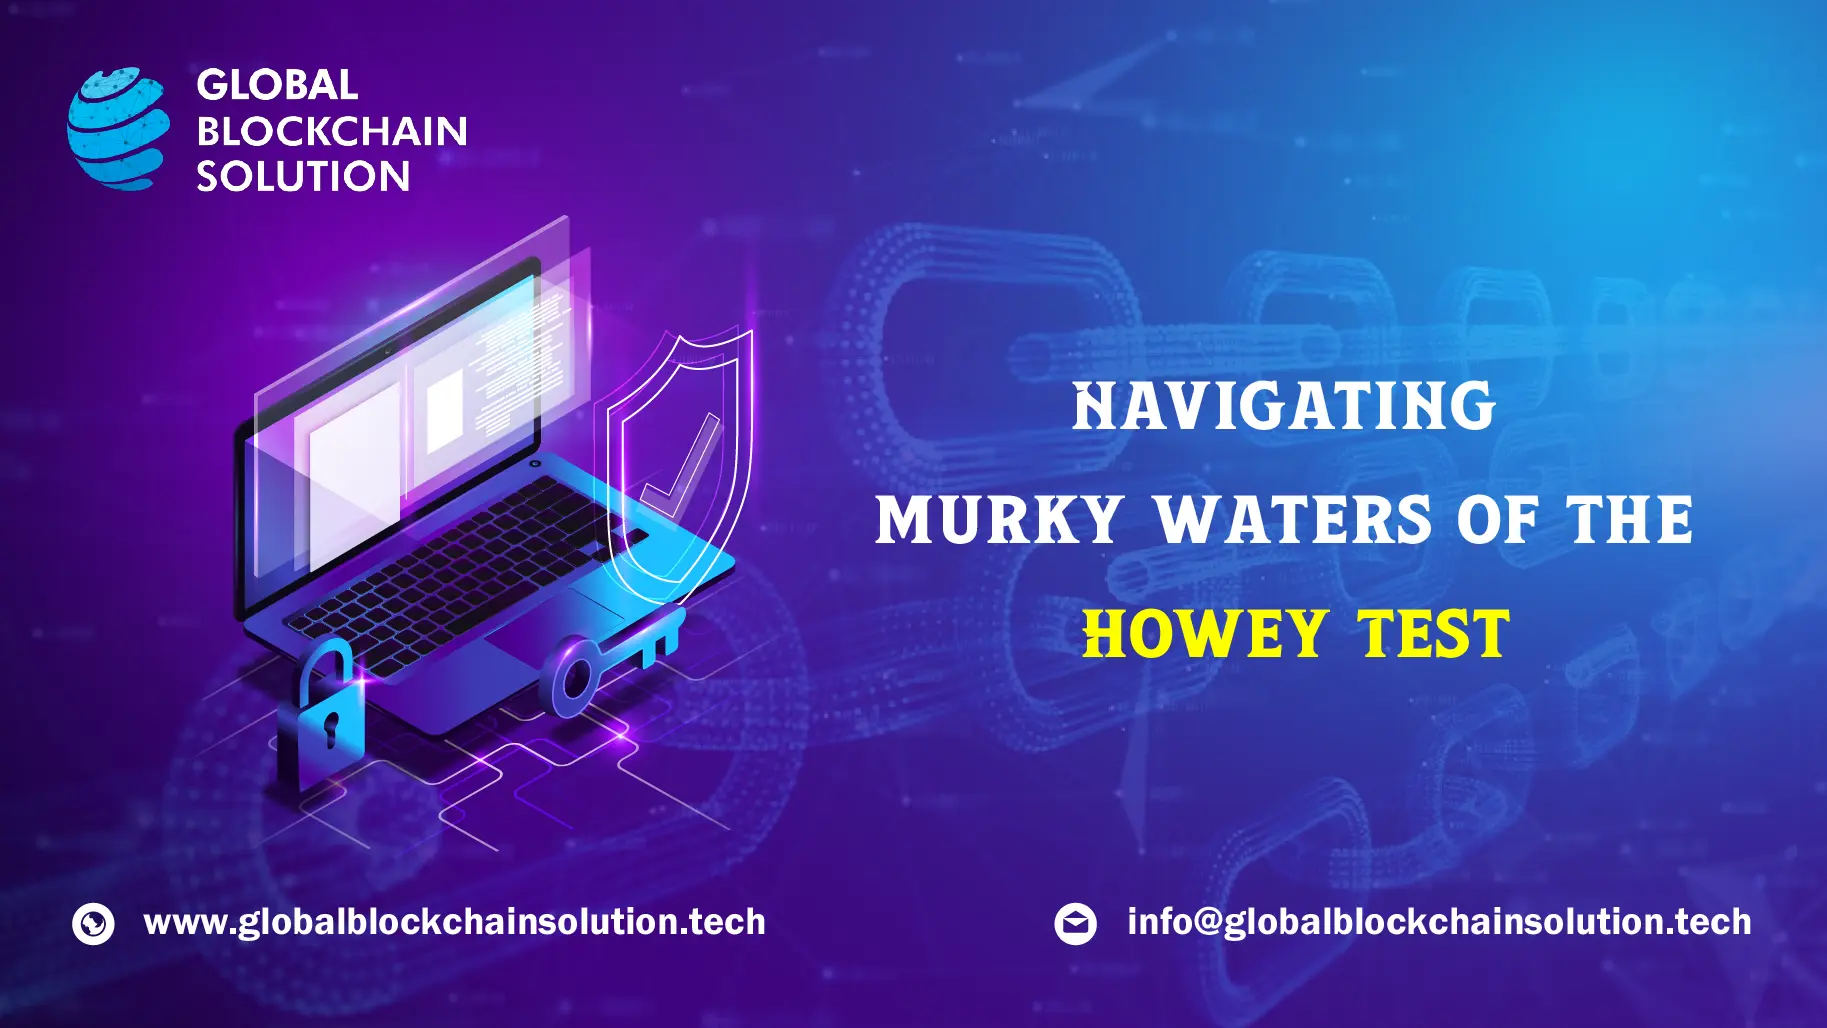 What is Howey Test? Definition, History and Role in Blockchain Regulation